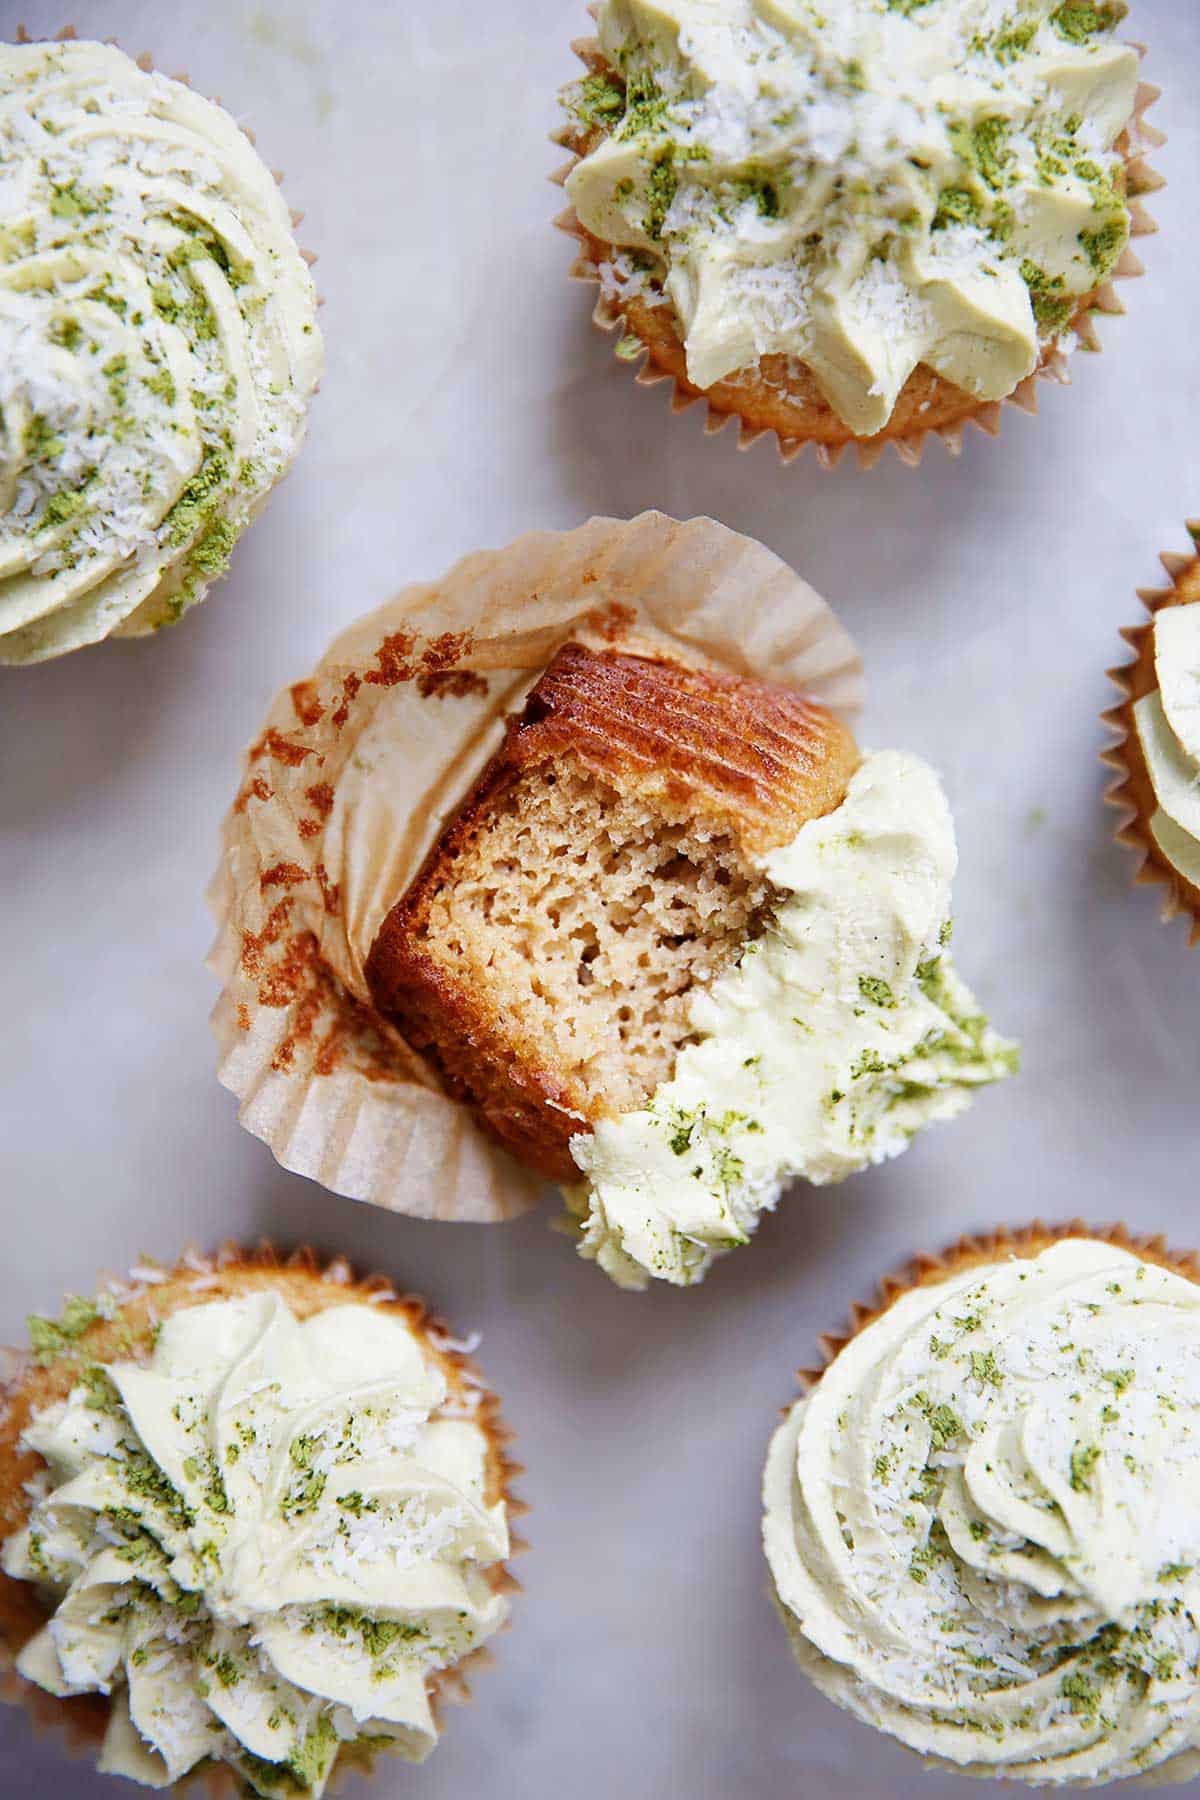 Paleo Cupcakes With Matcha Coconut Buttercream Frosting